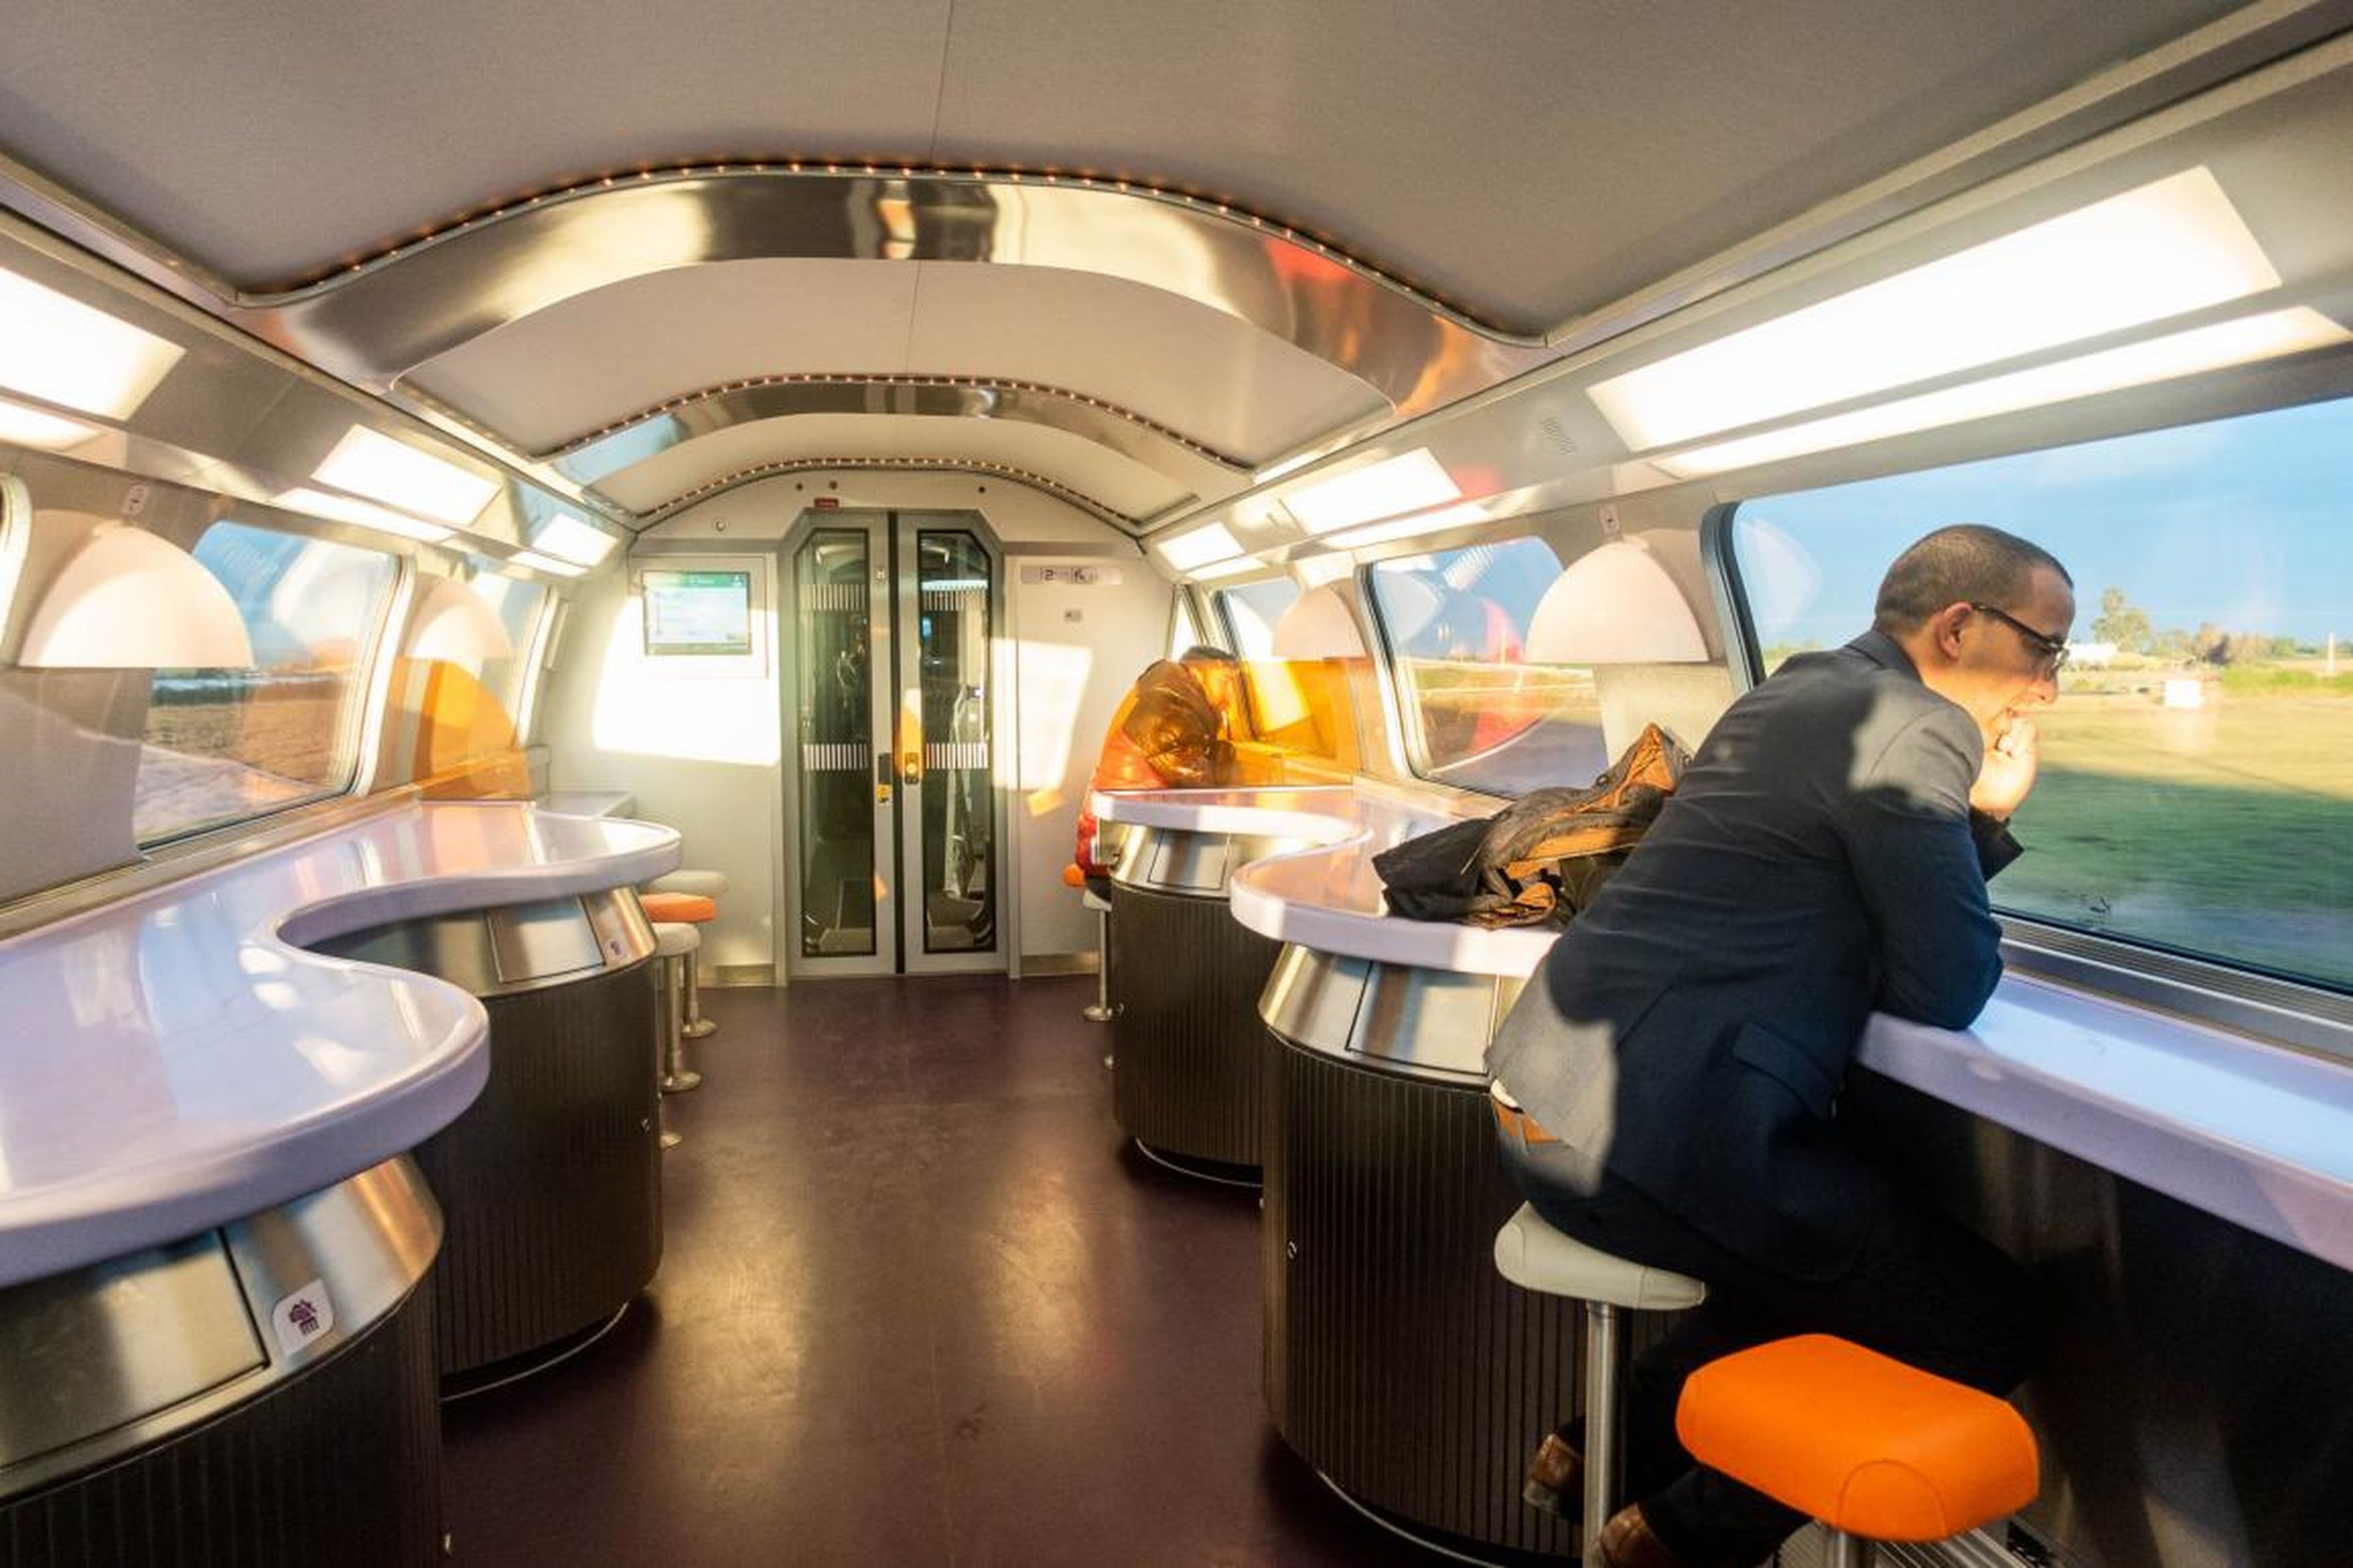 The cafeteria car had a retro but futuristic vibe with its curved ceilings, wavy bar table, and colorful stools.